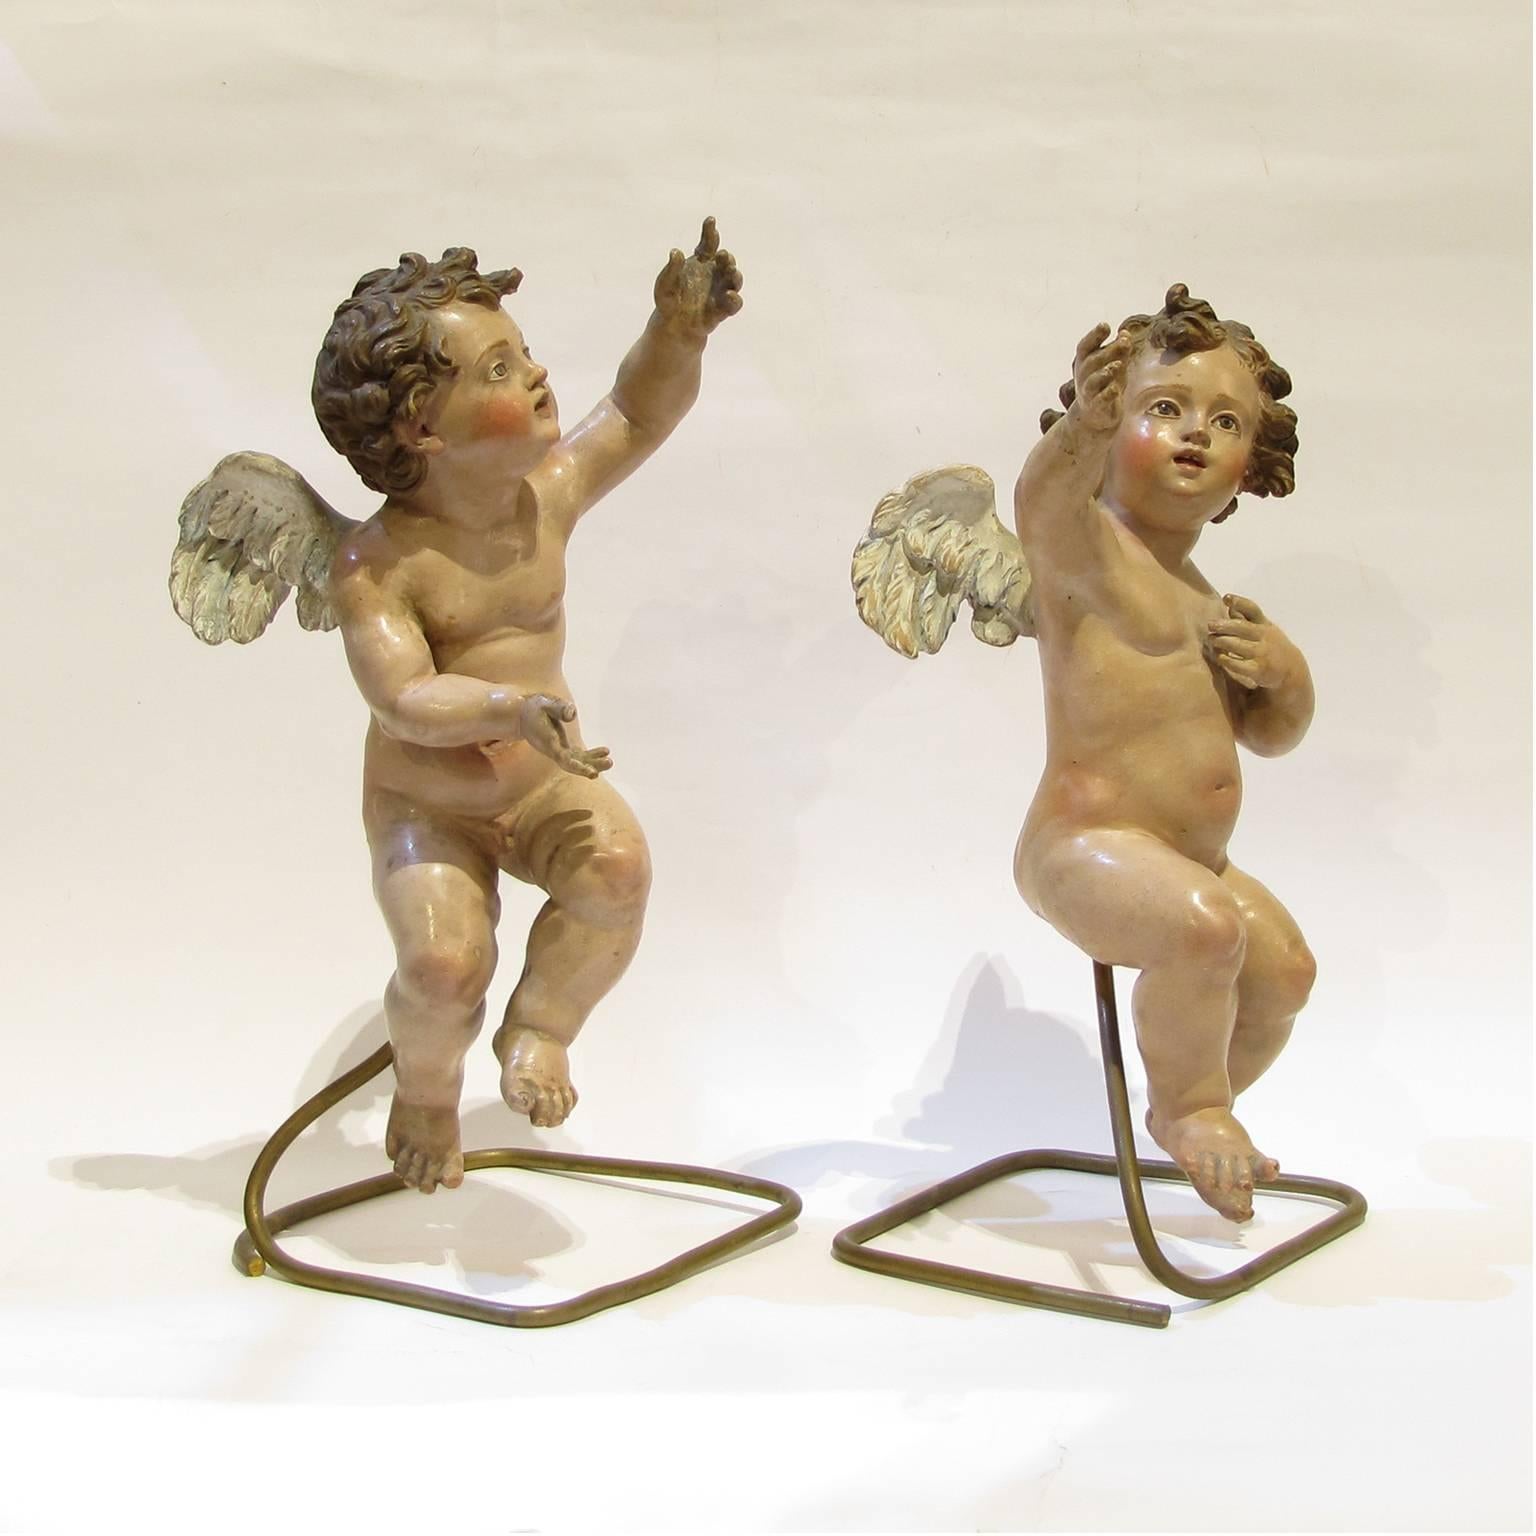 A beautiful pair of sculptures of young angels in polychrome terracotta. Neapolitan manufactory from the early 18th century.